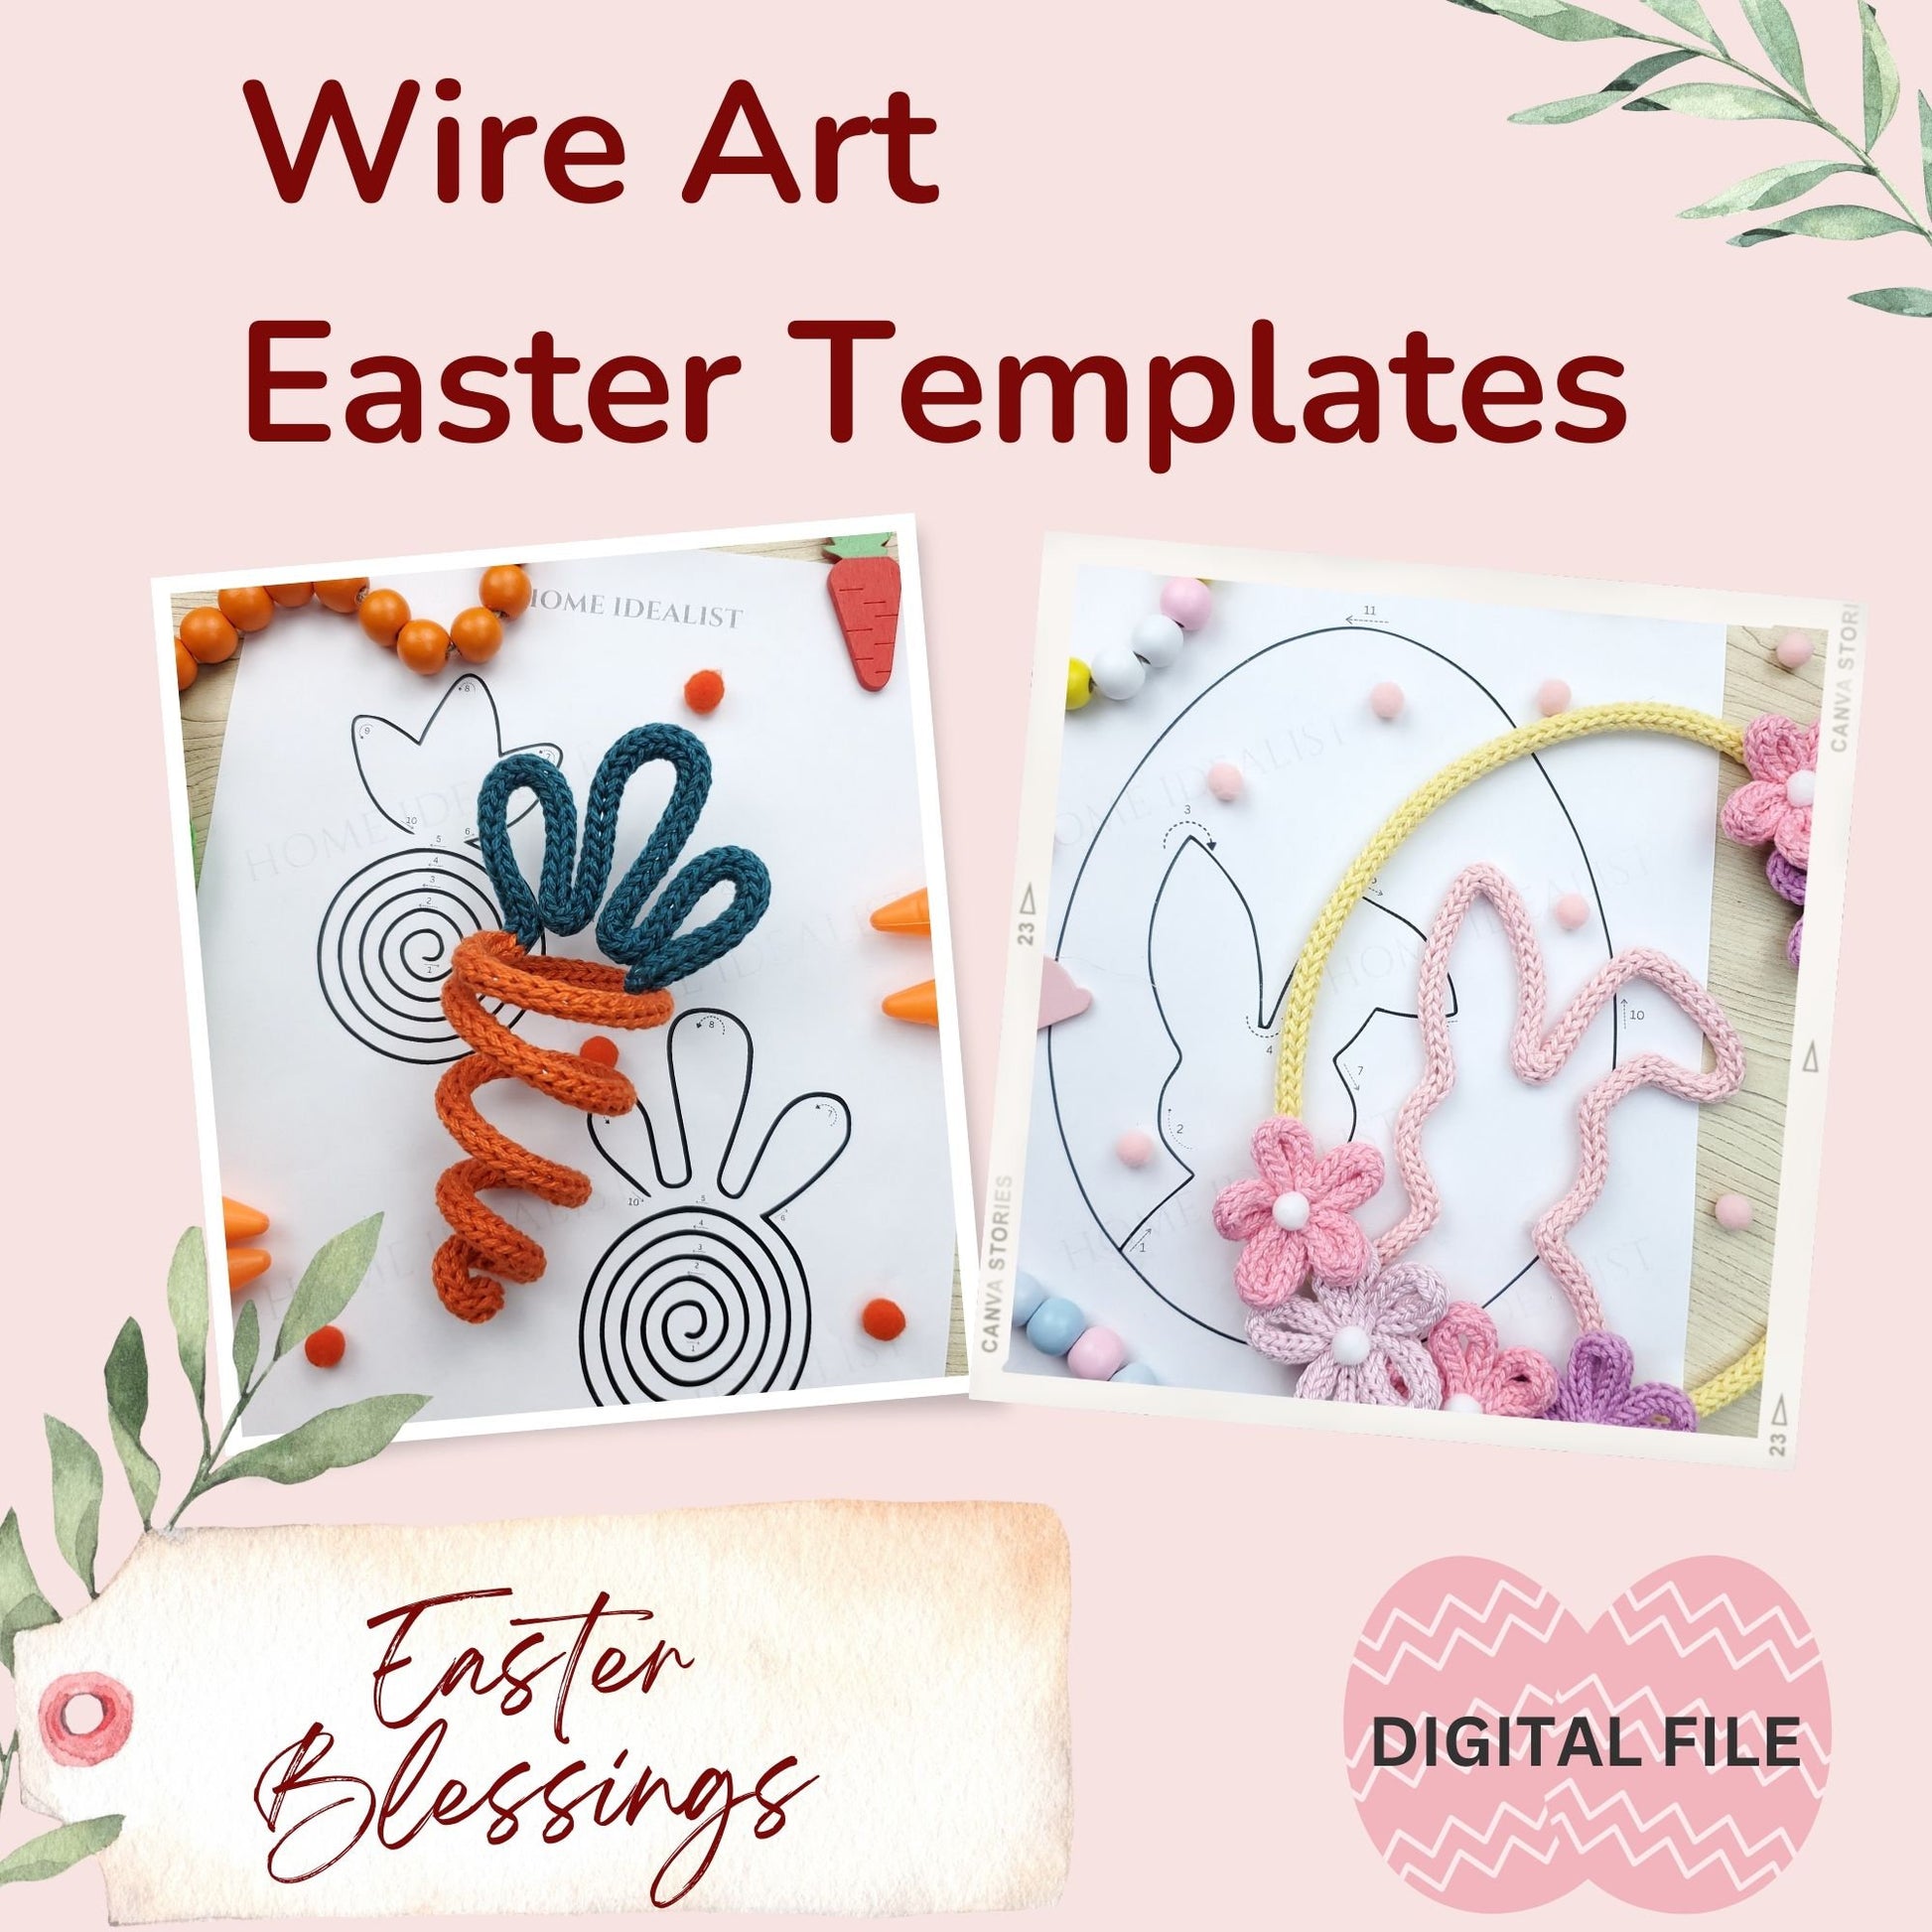 25+ Easter Knitted Wire Patterns Bundle. Printable Templates for Knitted Wire. Tricotin Art. Instant Digital Download.